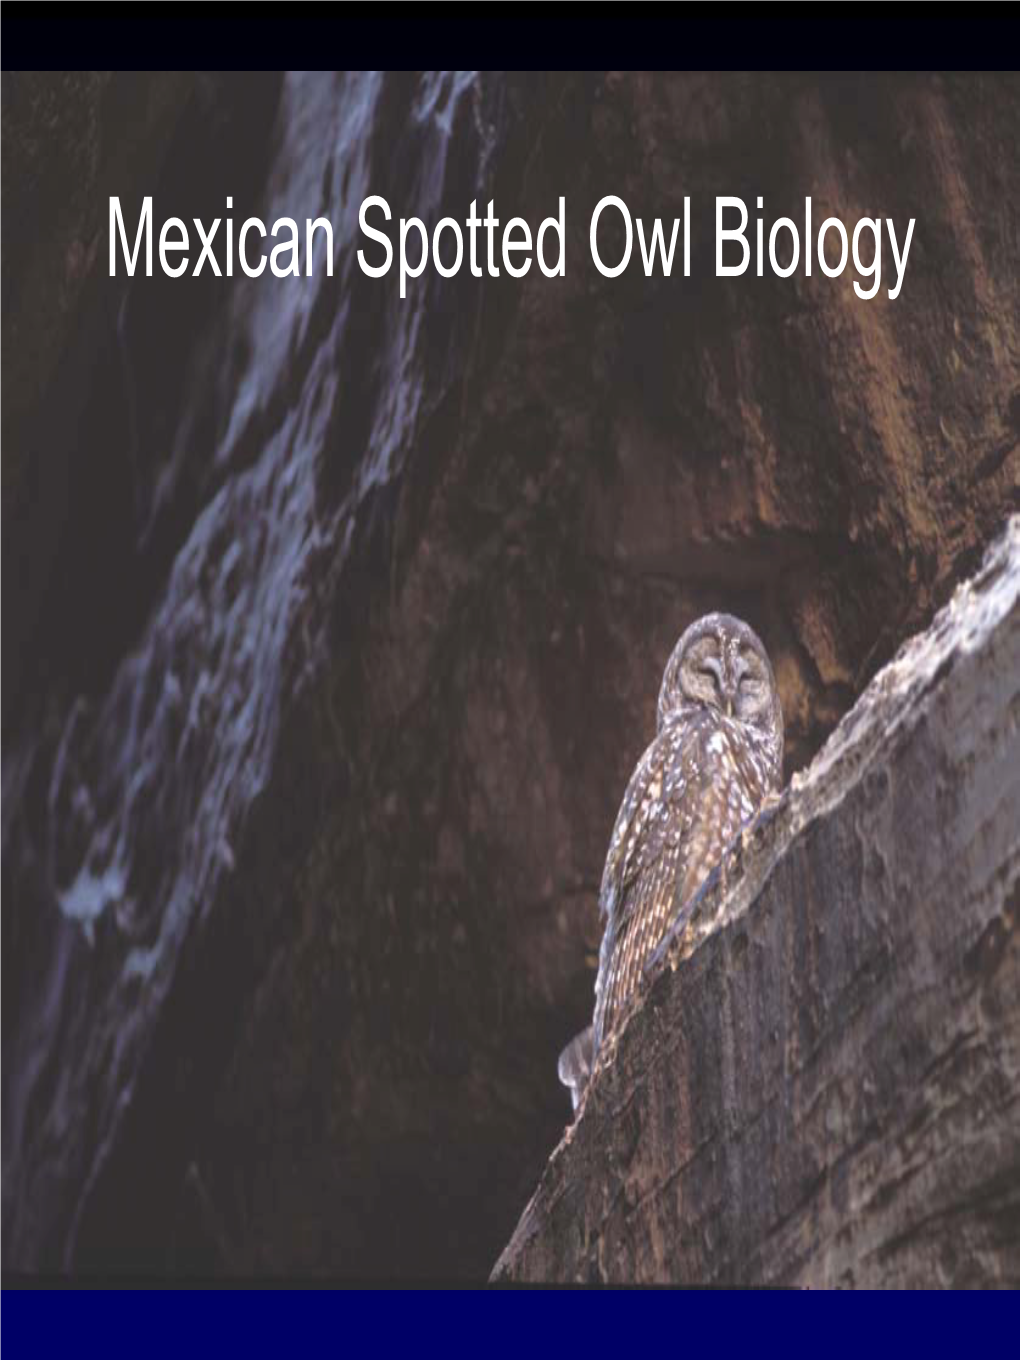 Mexican Spotted Owl Biology Powerpoint